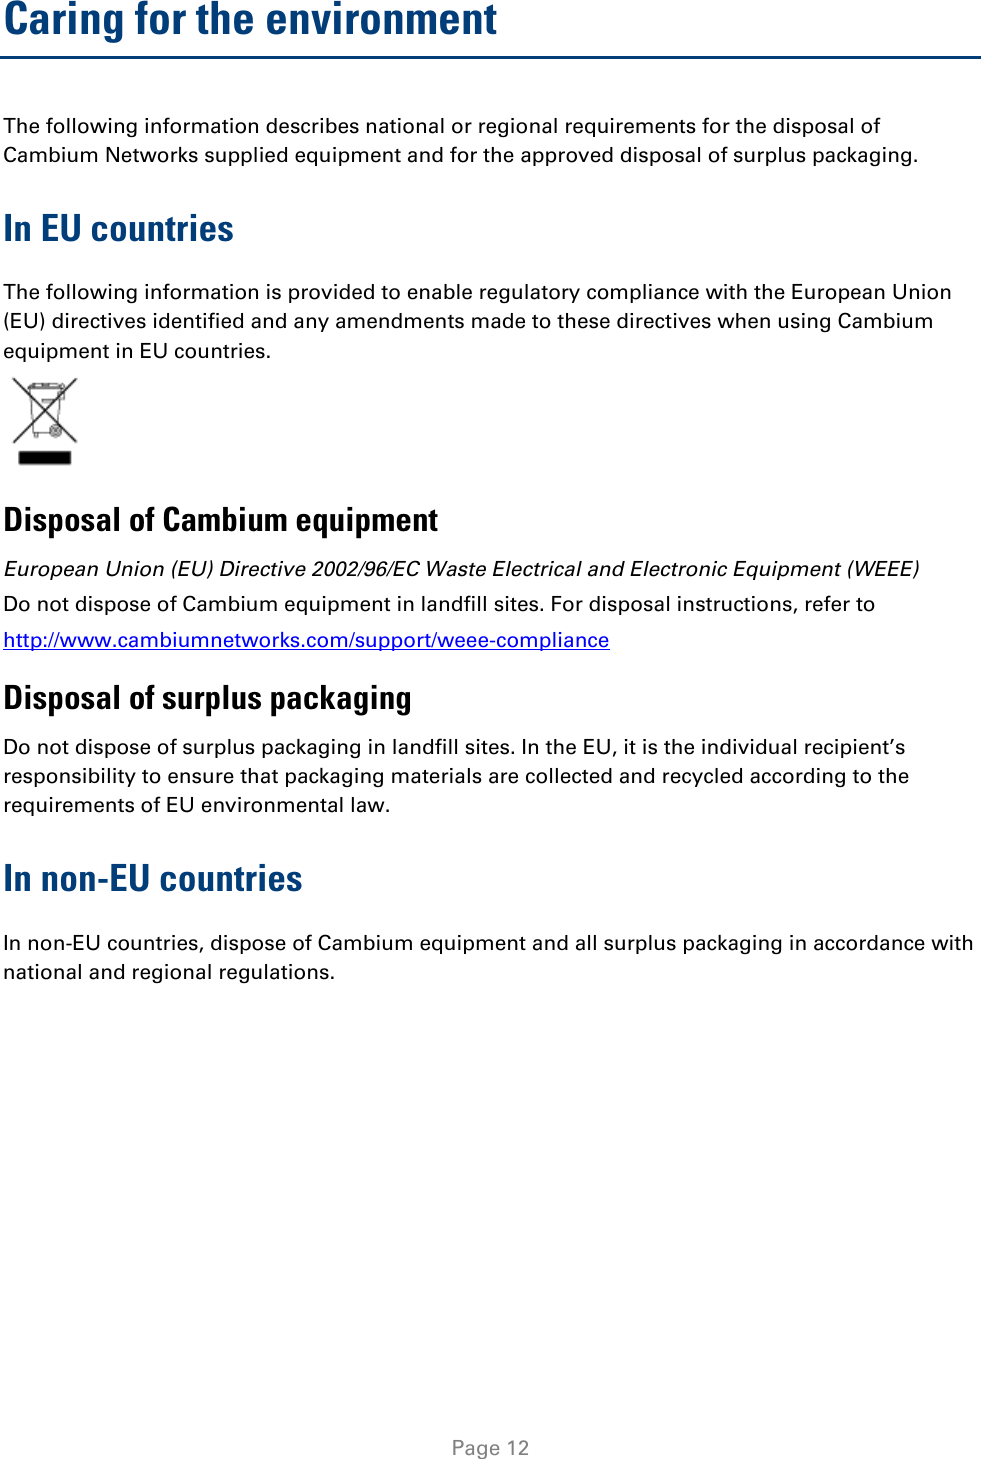   Page 12 Caring for the environment The following information describes national or regional requirements for the disposal of Cambium Networks supplied equipment and for the approved disposal of surplus packaging. In EU countries The following information is provided to enable regulatory compliance with the European Union (EU) directives identified and any amendments made to these directives when using Cambium equipment in EU countries.  Disposal of Cambium equipment European Union (EU) Directive 2002/96/EC Waste Electrical and Electronic Equipment (WEEE) Do not dispose of Cambium equipment in landfill sites. For disposal instructions, refer to  http://www.cambiumnetworks.com/support/weee-compliance Disposal of surplus packaging Do not dispose of surplus packaging in landfill sites. In the EU, it is the individual recipient’s responsibility to ensure that packaging materials are collected and recycled according to the requirements of EU environmental law. In non-EU countries In non-EU countries, dispose of Cambium equipment and all surplus packaging in accordance with national and regional regulations.  